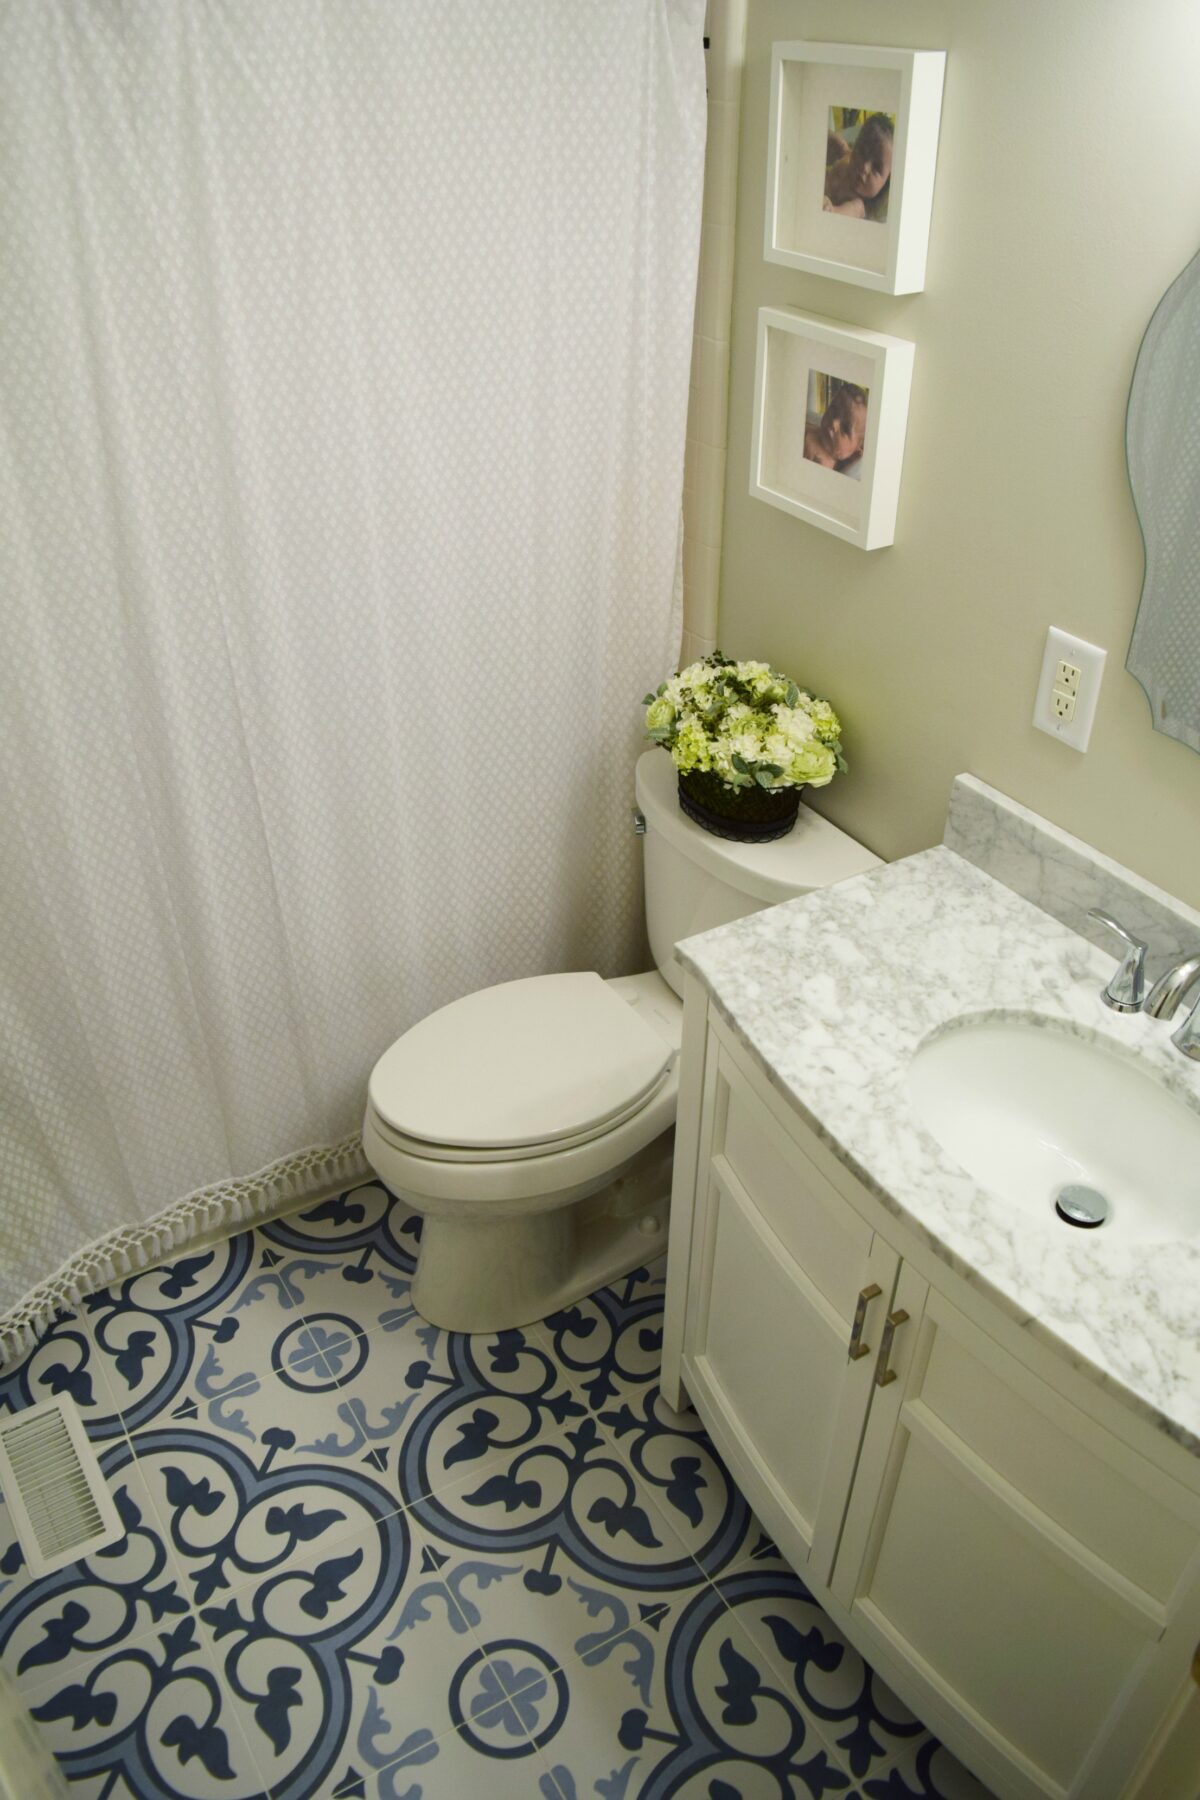 :: Guest Bathroom Update (on a budget) ::